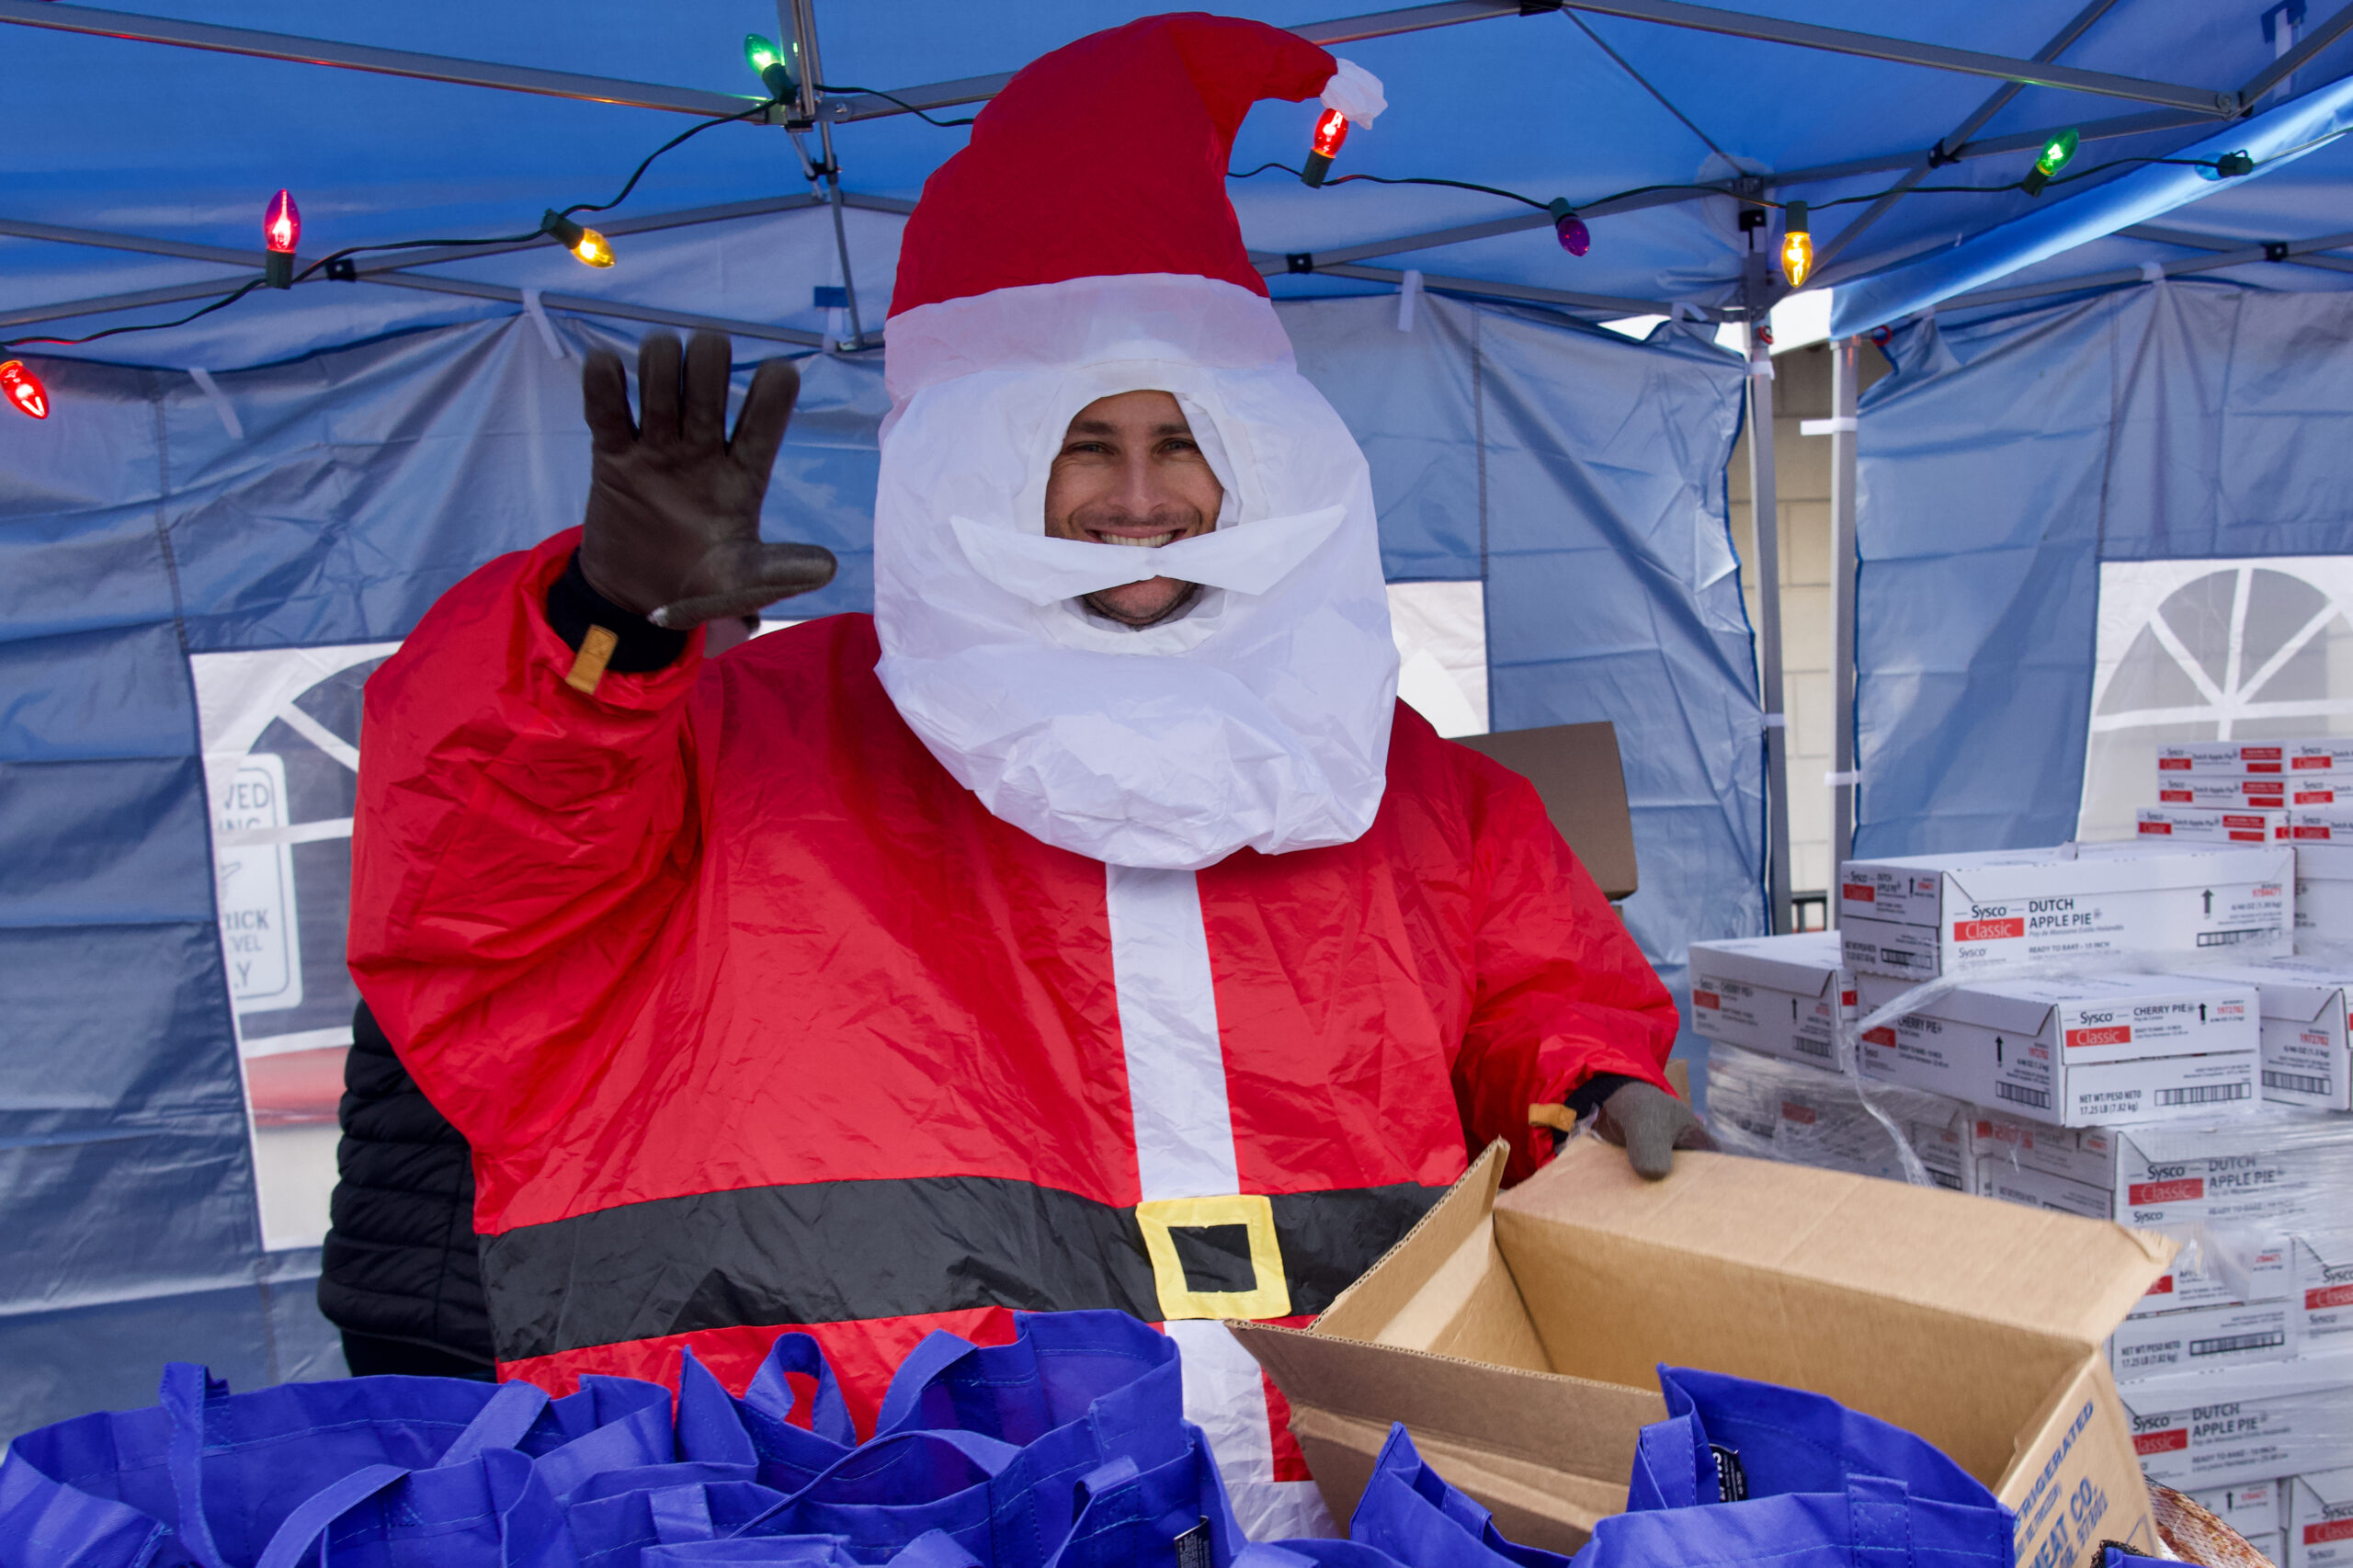 A man dressed like Santa Claus waving and holding a box in his hand